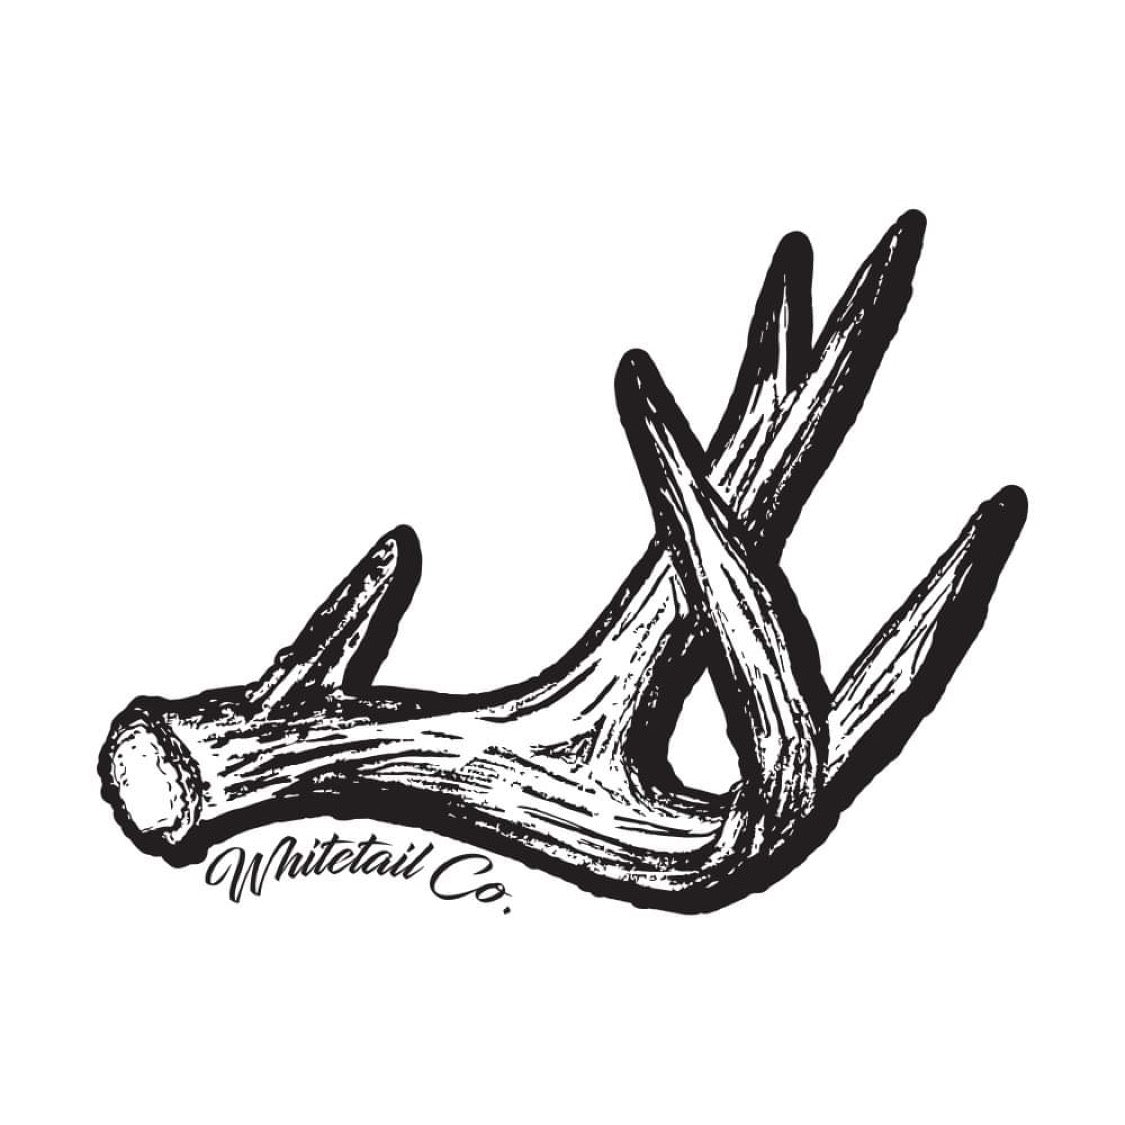 3” Whitetail Co. Shed Antler Decal – Whitetail Company